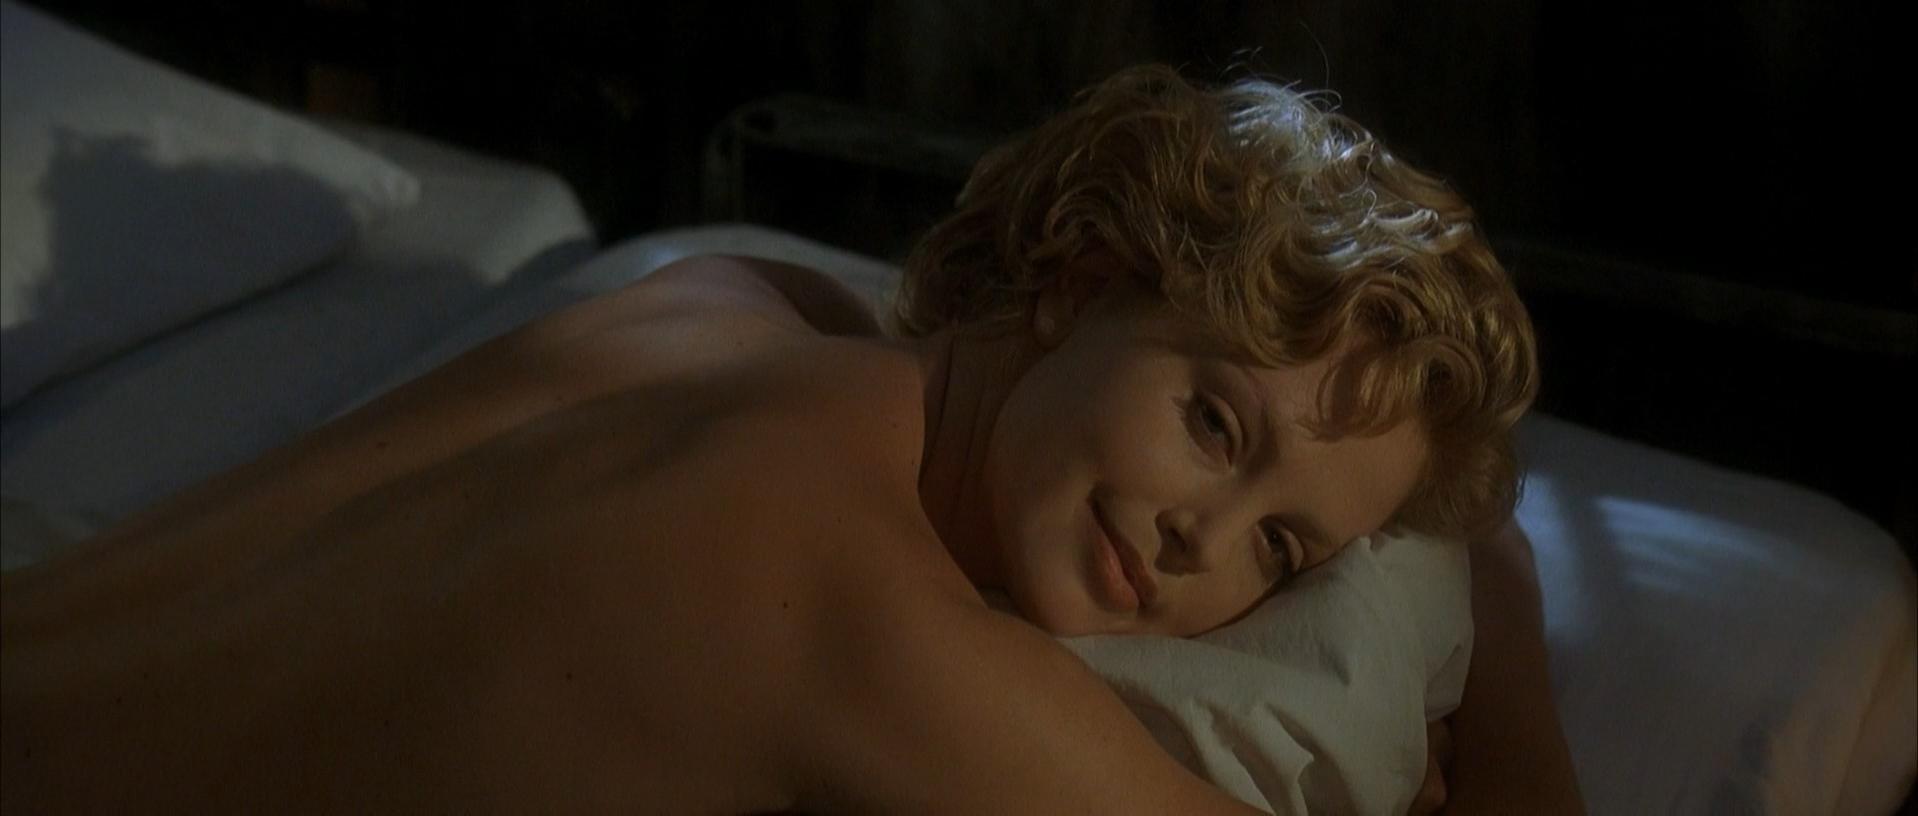 Charlize Theron nude - The Cider House Rules (1999)